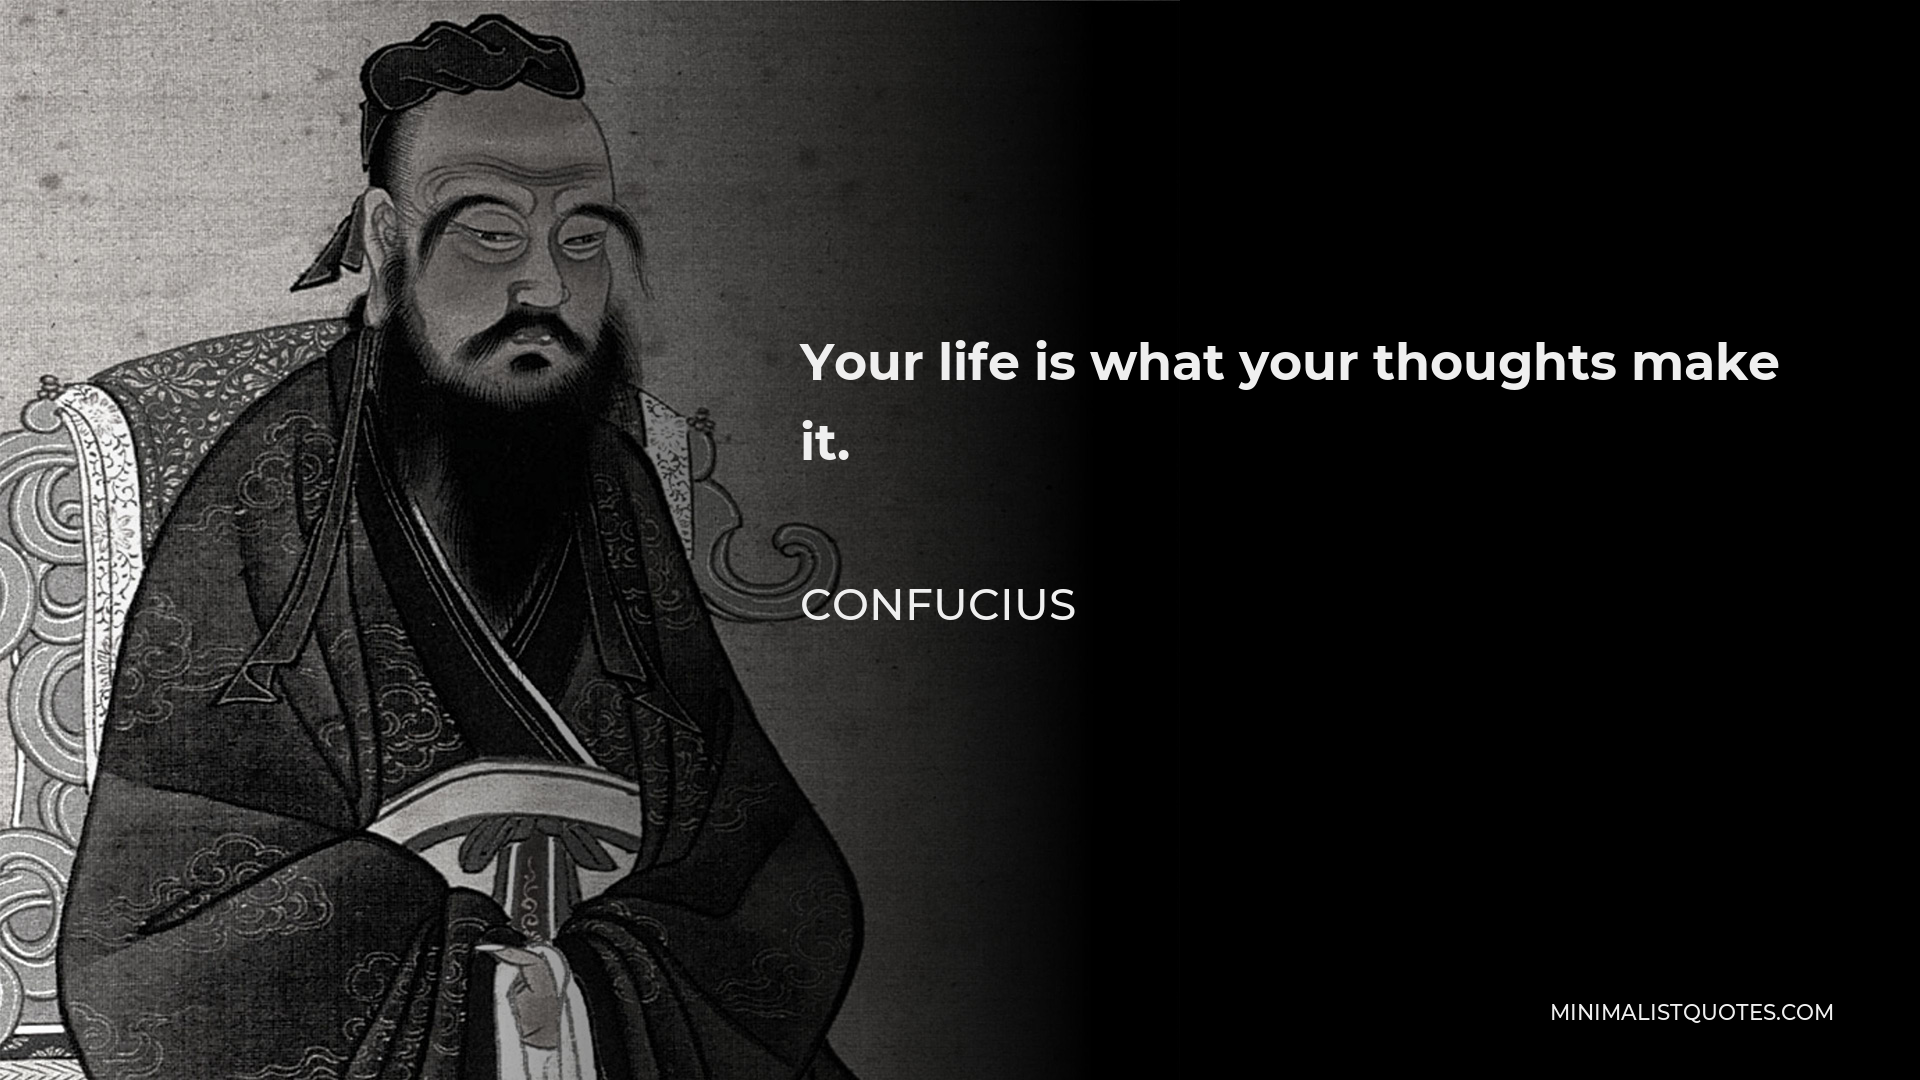 Confucius Quote - Your life is what your thoughts make it.